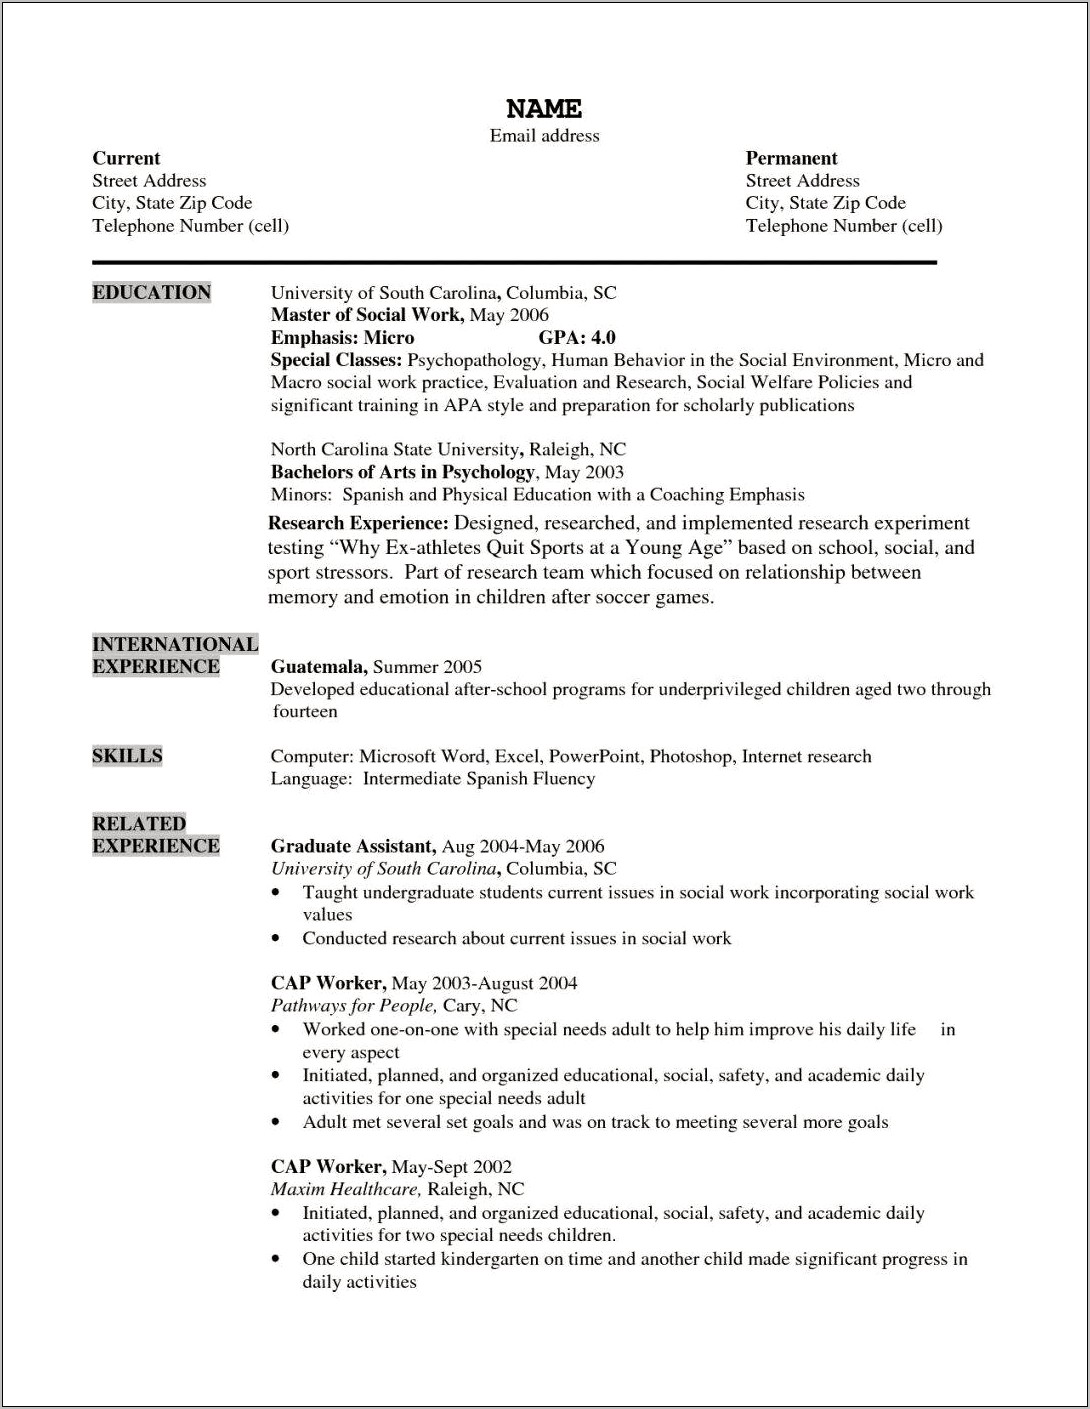 Resume Cover Letter For Older Workers